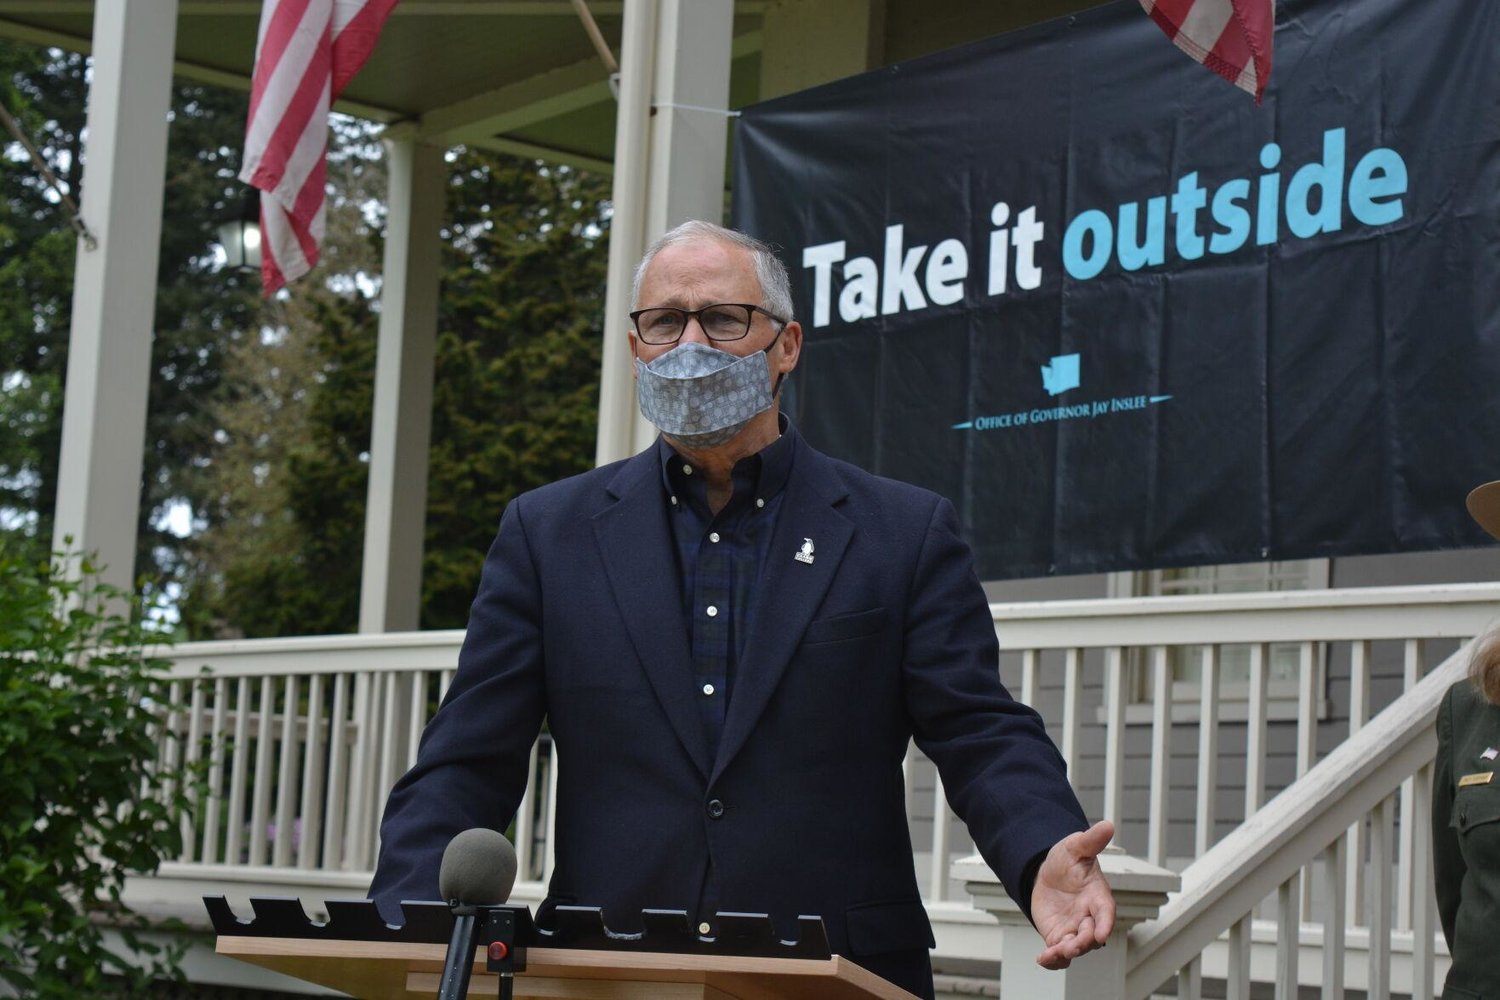 Washington Gov. Jay Inslee visited the Fort Vancouver National Historic Site to promote “Take It Outside,” his statewide campaign encouraging residents to get outdoors.